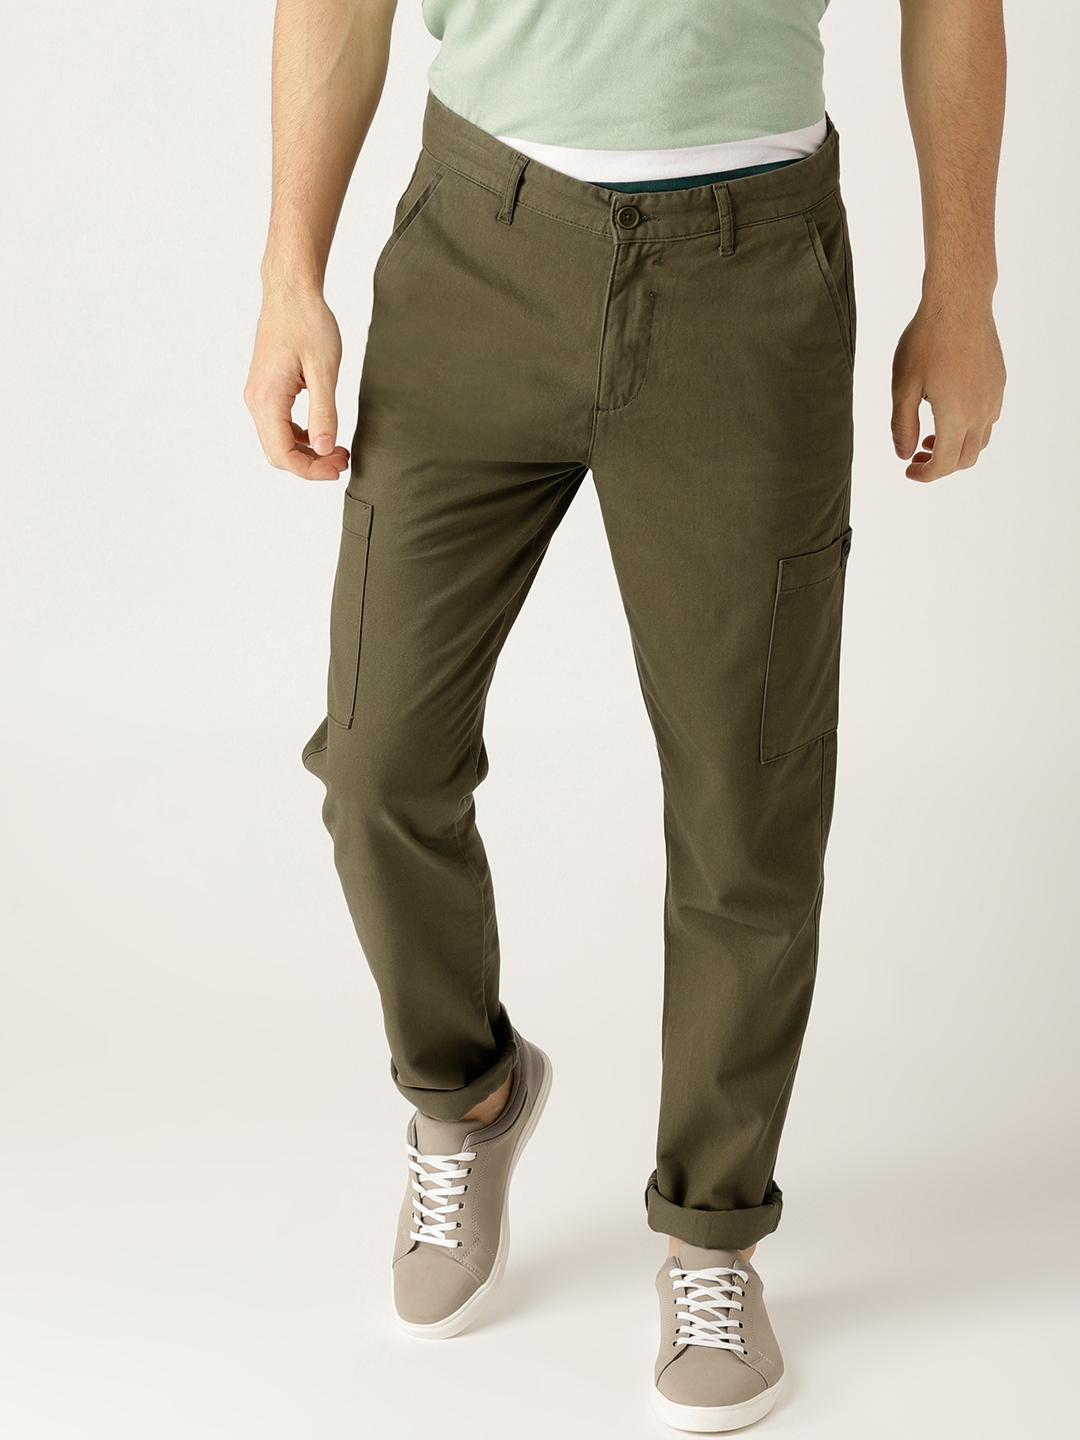 Buy United Colors Of Benetton Men Olive Green Solid Slim Fit Trousers   Trousers for Men 1604980  Myntra